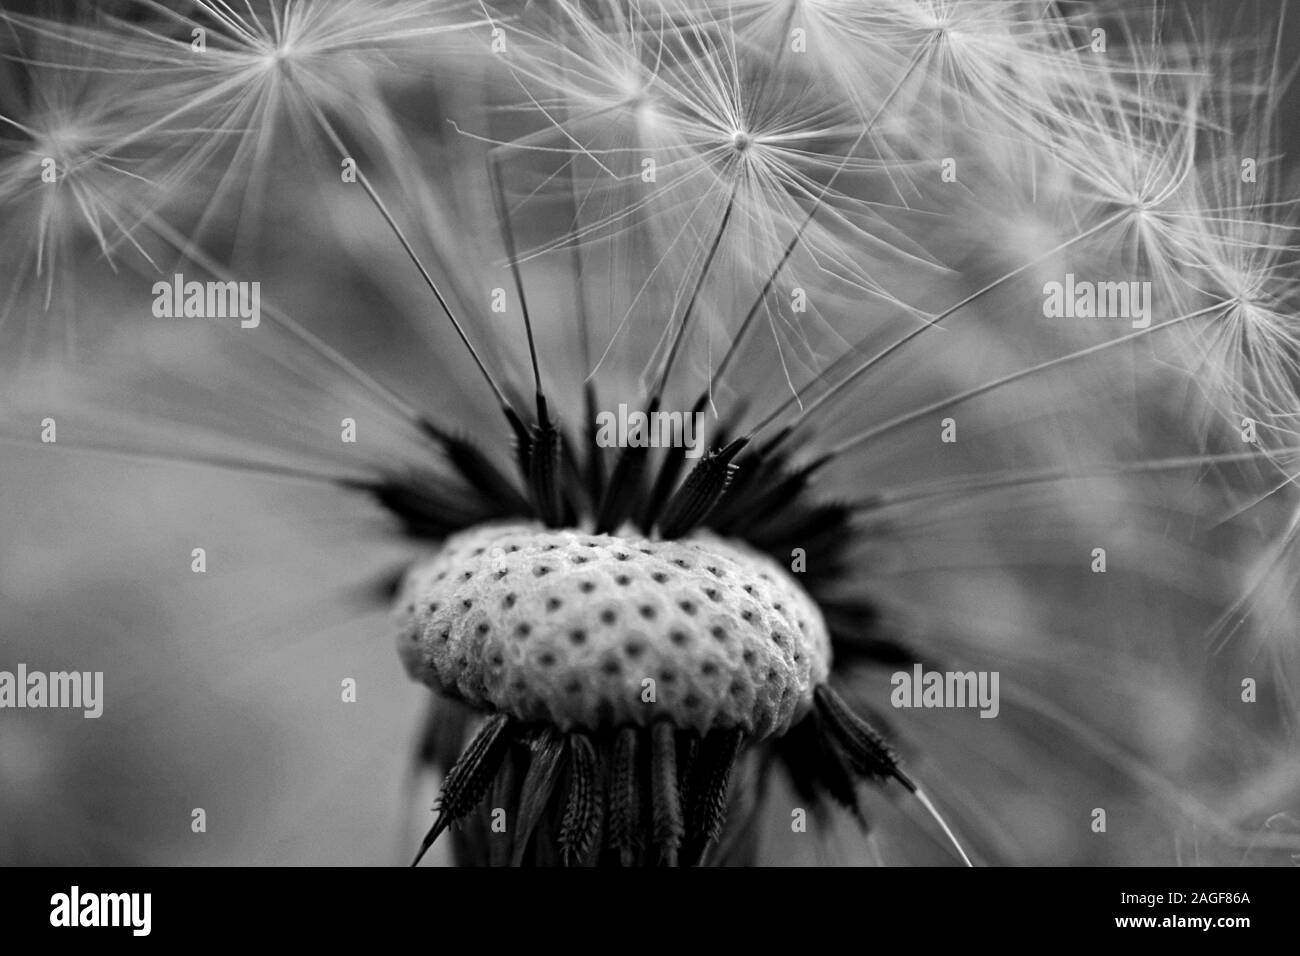 Closeup of dandelion seed/ conceptual image of luck and good wishes Stock Photo